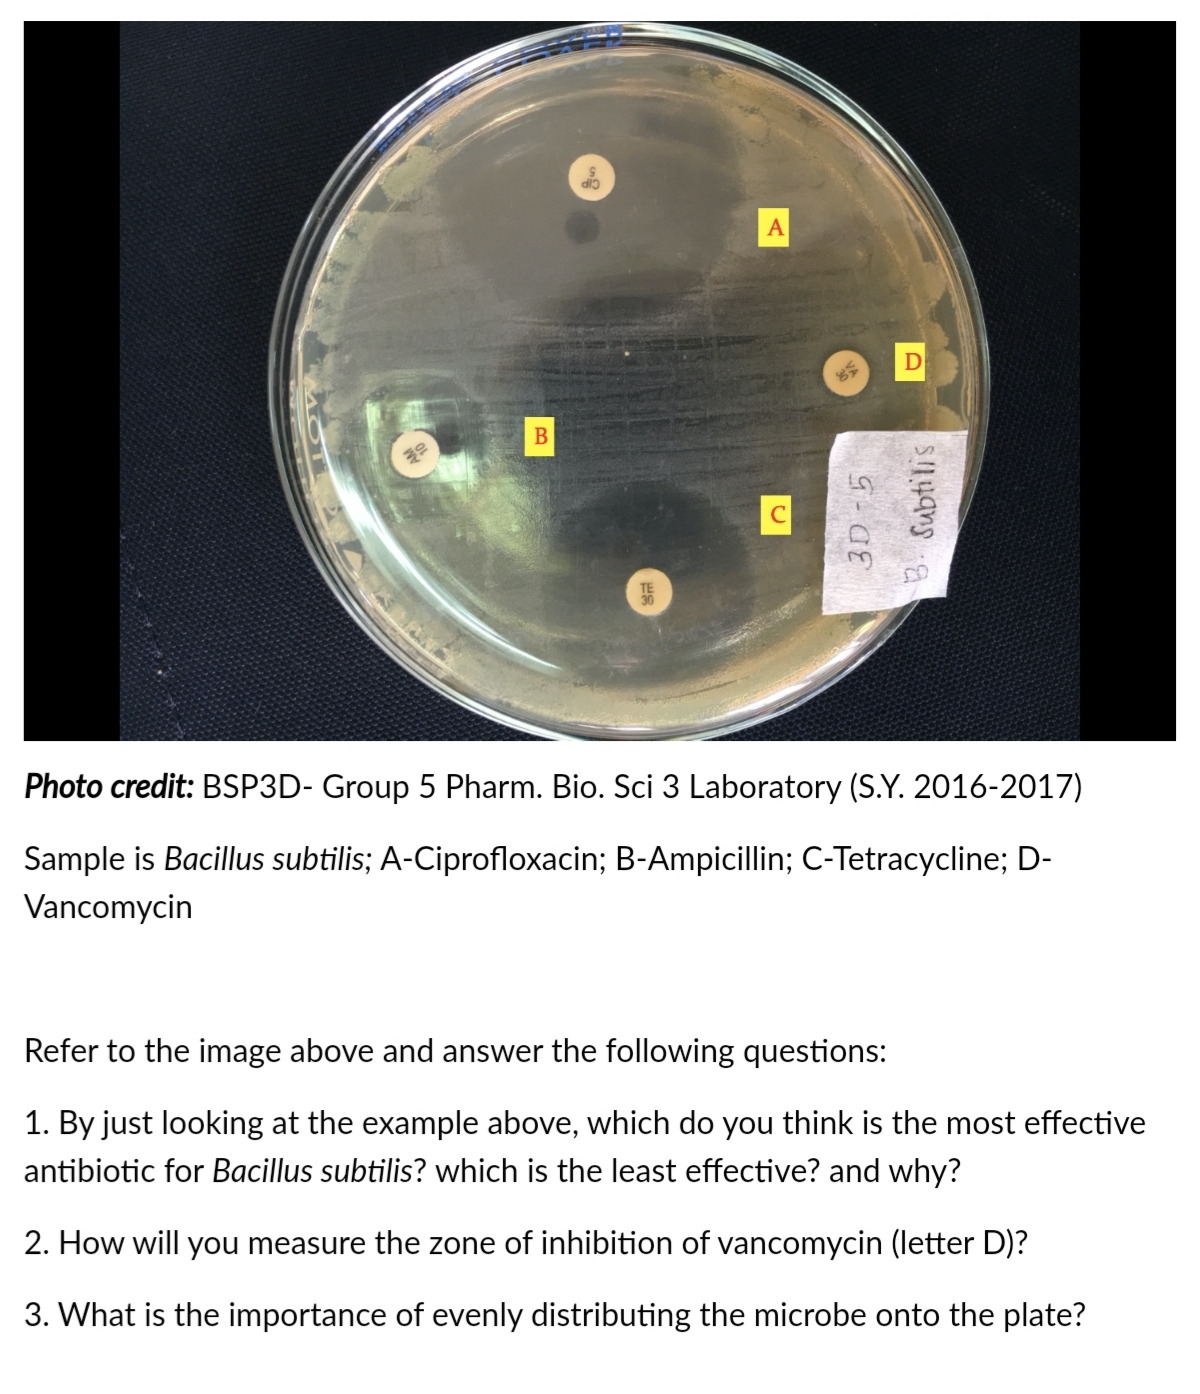 A
Photo credit: BSP3D- Group 5 Pharm. Bio. Sci 3 Laboratory (S.Y. 2016-2017)
Sample is Bacillus subtilis; A-Ciprofloxacin; B-Ampicillin; C-Tetracycline; D-
Vancomycin
Refer to the image above and answer the following questions:
1. By just looking at the example above, which do you think is the most effective
antibiotic for Bacillus subtilis? which is the least effective? and why?
2. How will you measure the zone of inhibition of vancomycin (letter D)?
3. What is the importance of evenly distributing the microbe onto the plate?
3. Subtilis
